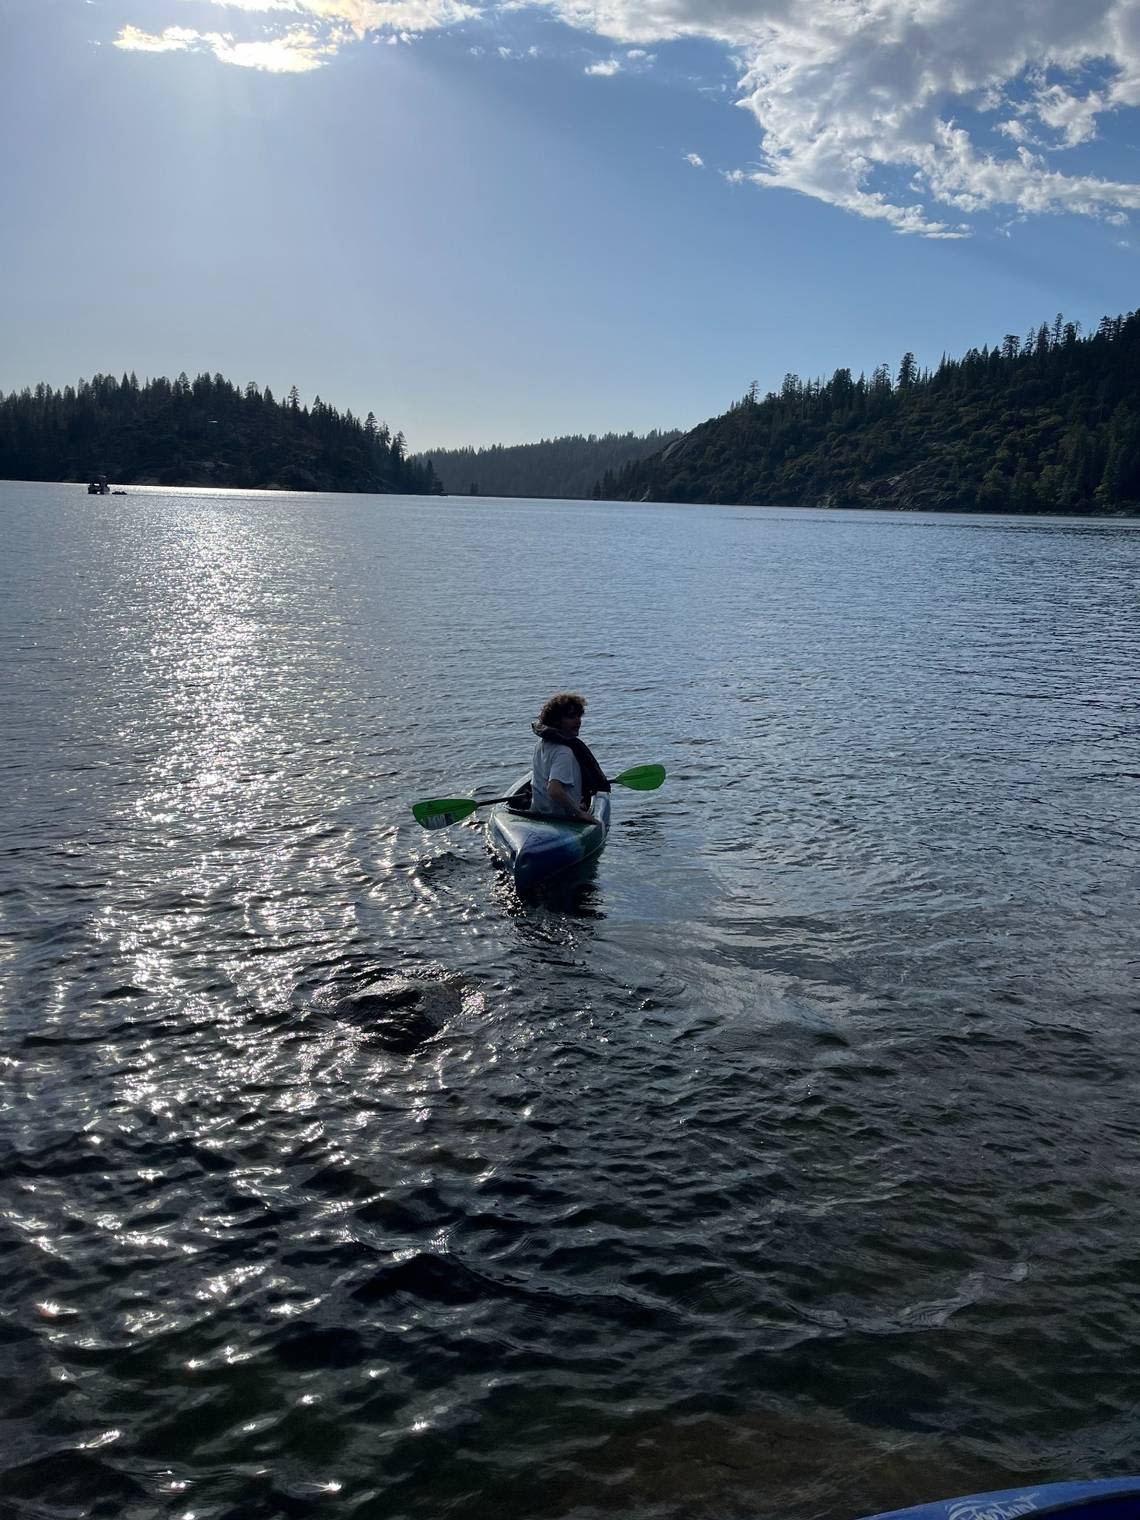 Heading to a reservoir or river? California law may require you to pack a life jacket